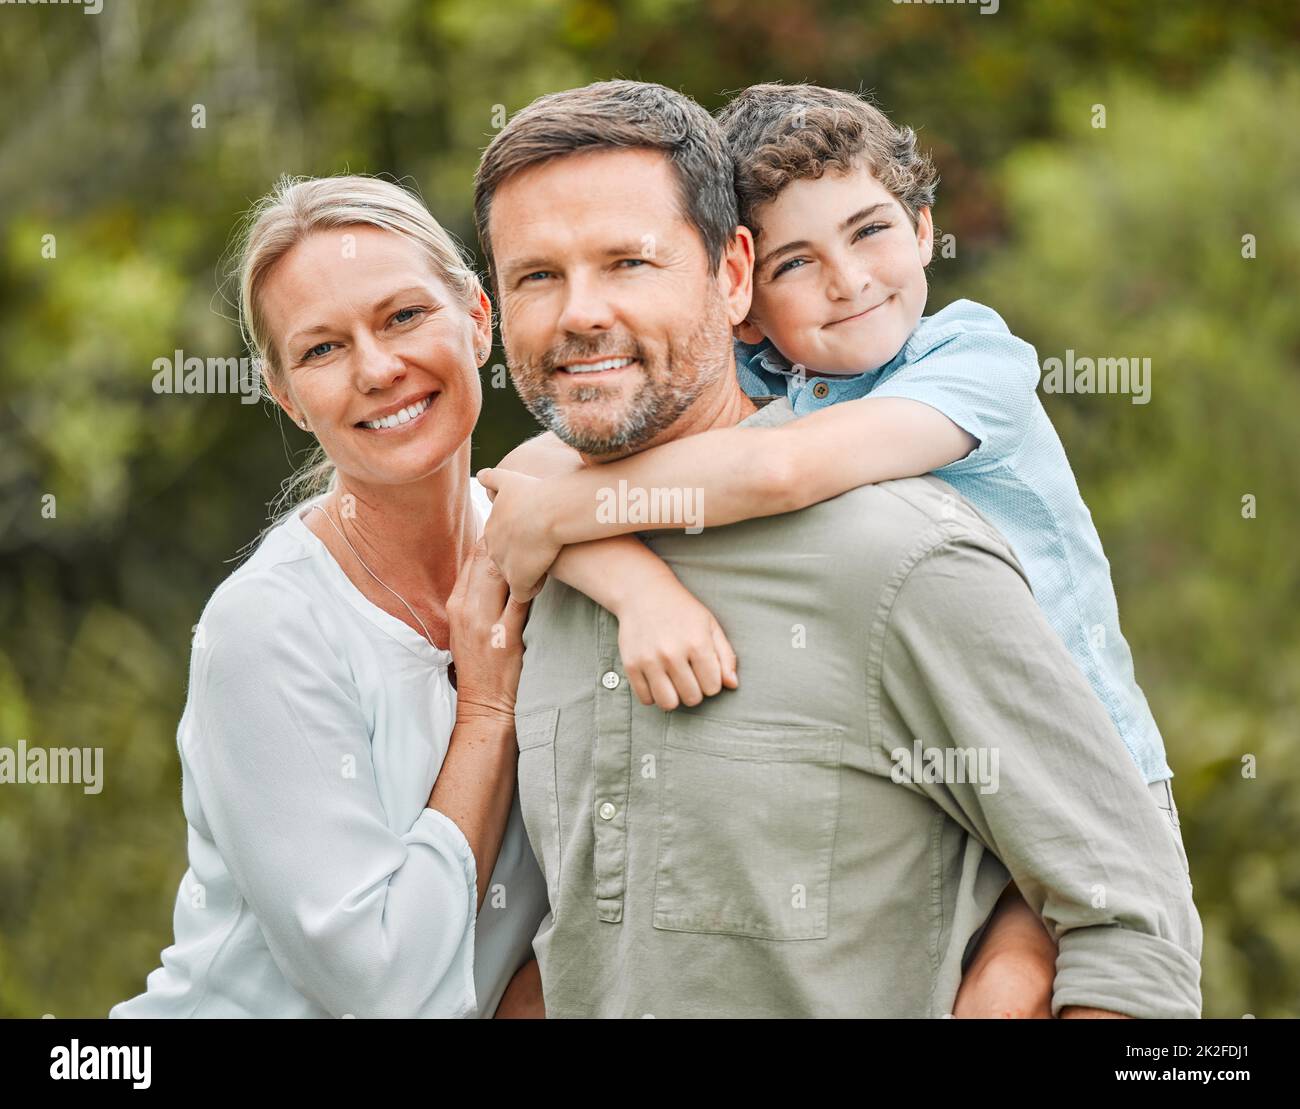 Perfect doesnt exist but family is pretty perfect. Shot of a couple and their young son spending time outdoors. Stock Photo